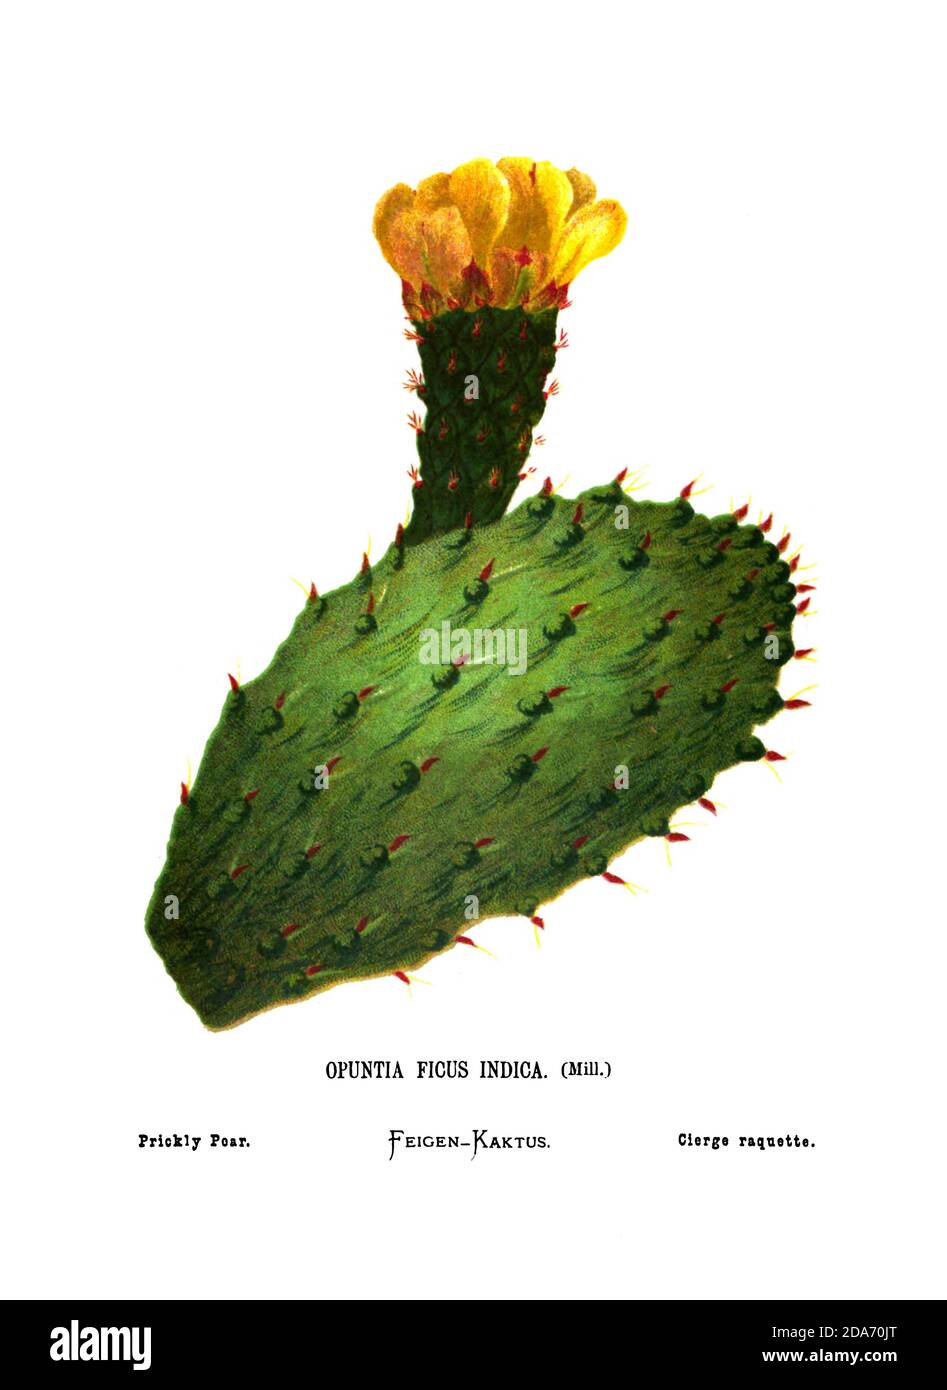 Flowering Prickly pear (Opuntia ficus indica) From the book Wild flowers of the Holy Land: Fifty-Four Plates Printed In Colours, Drawn And Painted After Nature. by Mrs. Hannah Zeller, (Gobat); Tristram, H. B. (Henry Baker), and Edward Atkinson, Published in London by James Nisbet & Co 1876 on white background Stock Photo